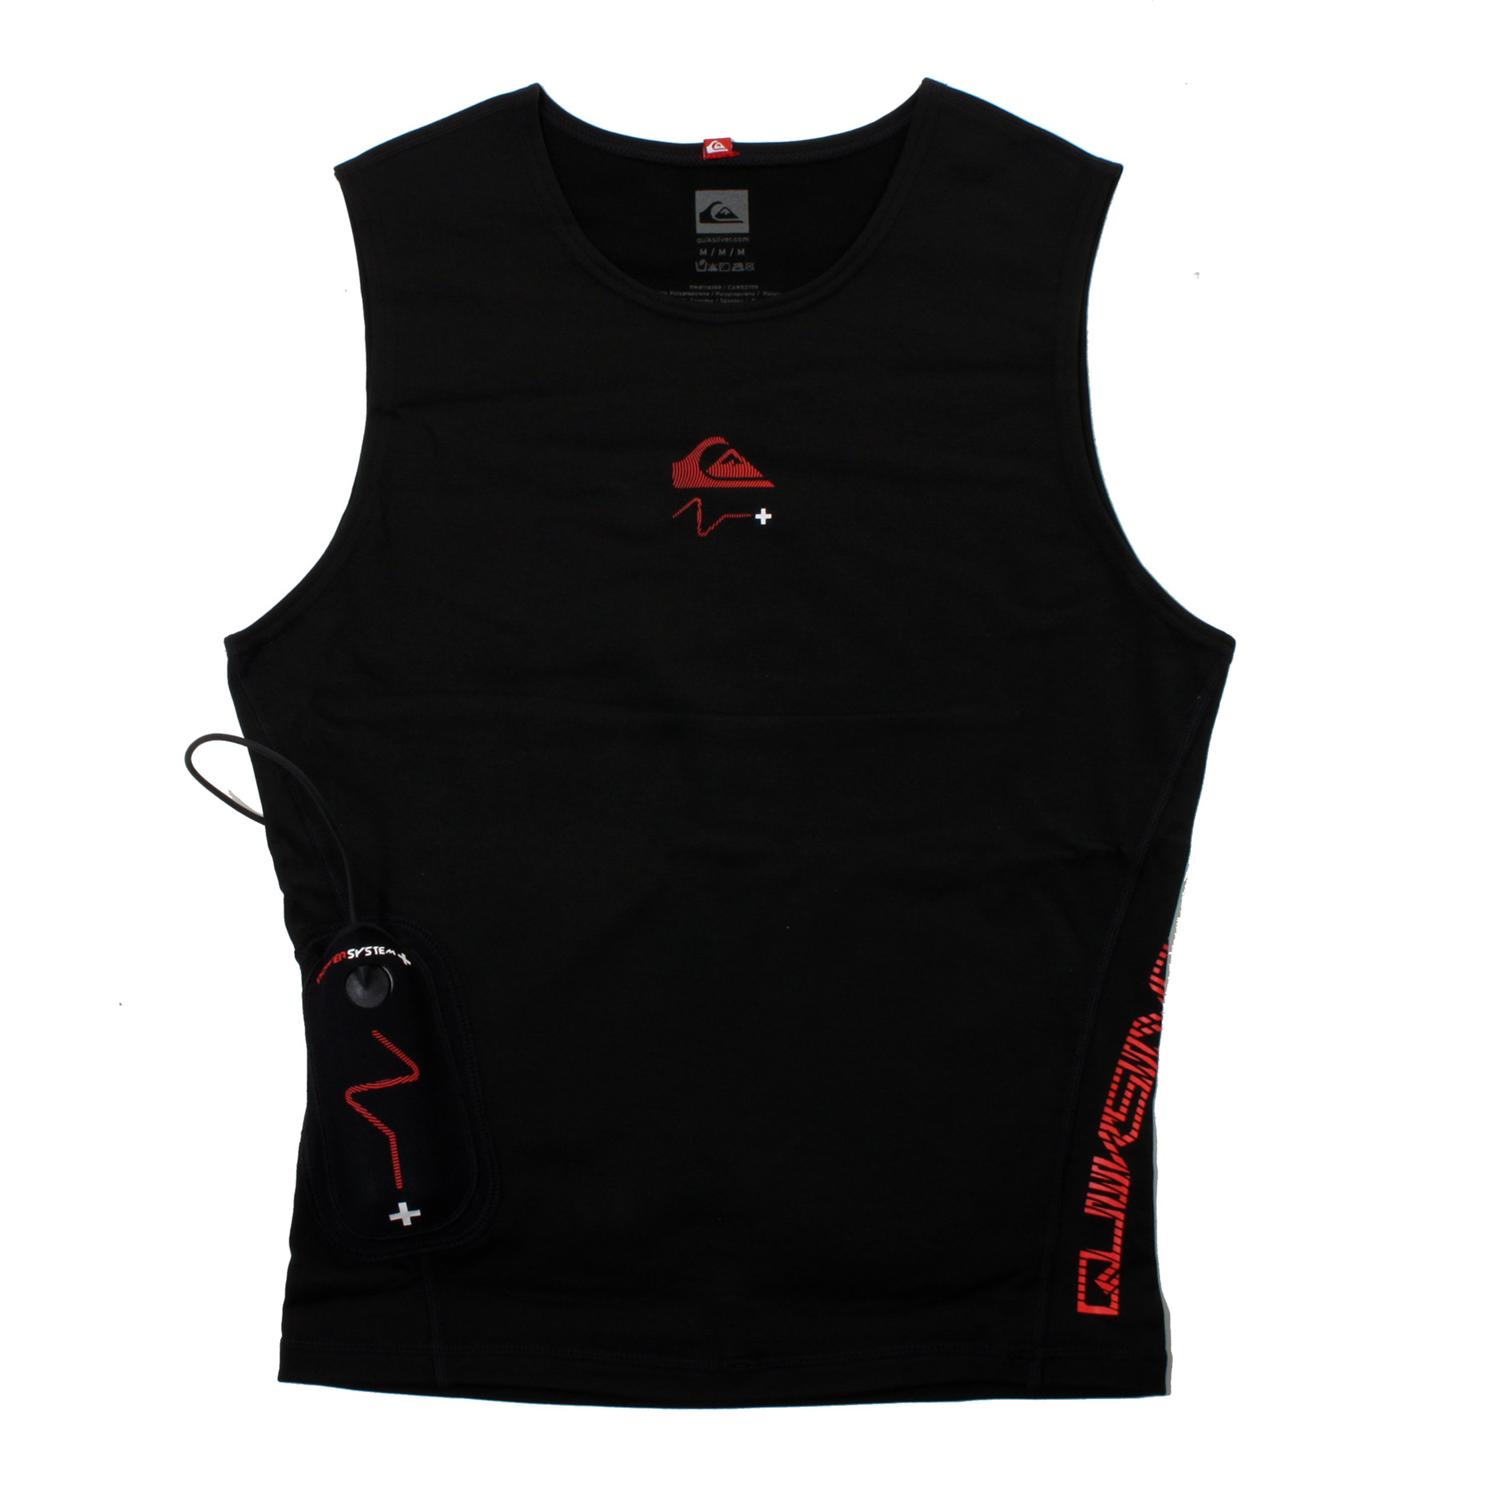 Quiksilver Cypher Ps+ Heated Vest 2010 | evo outlet